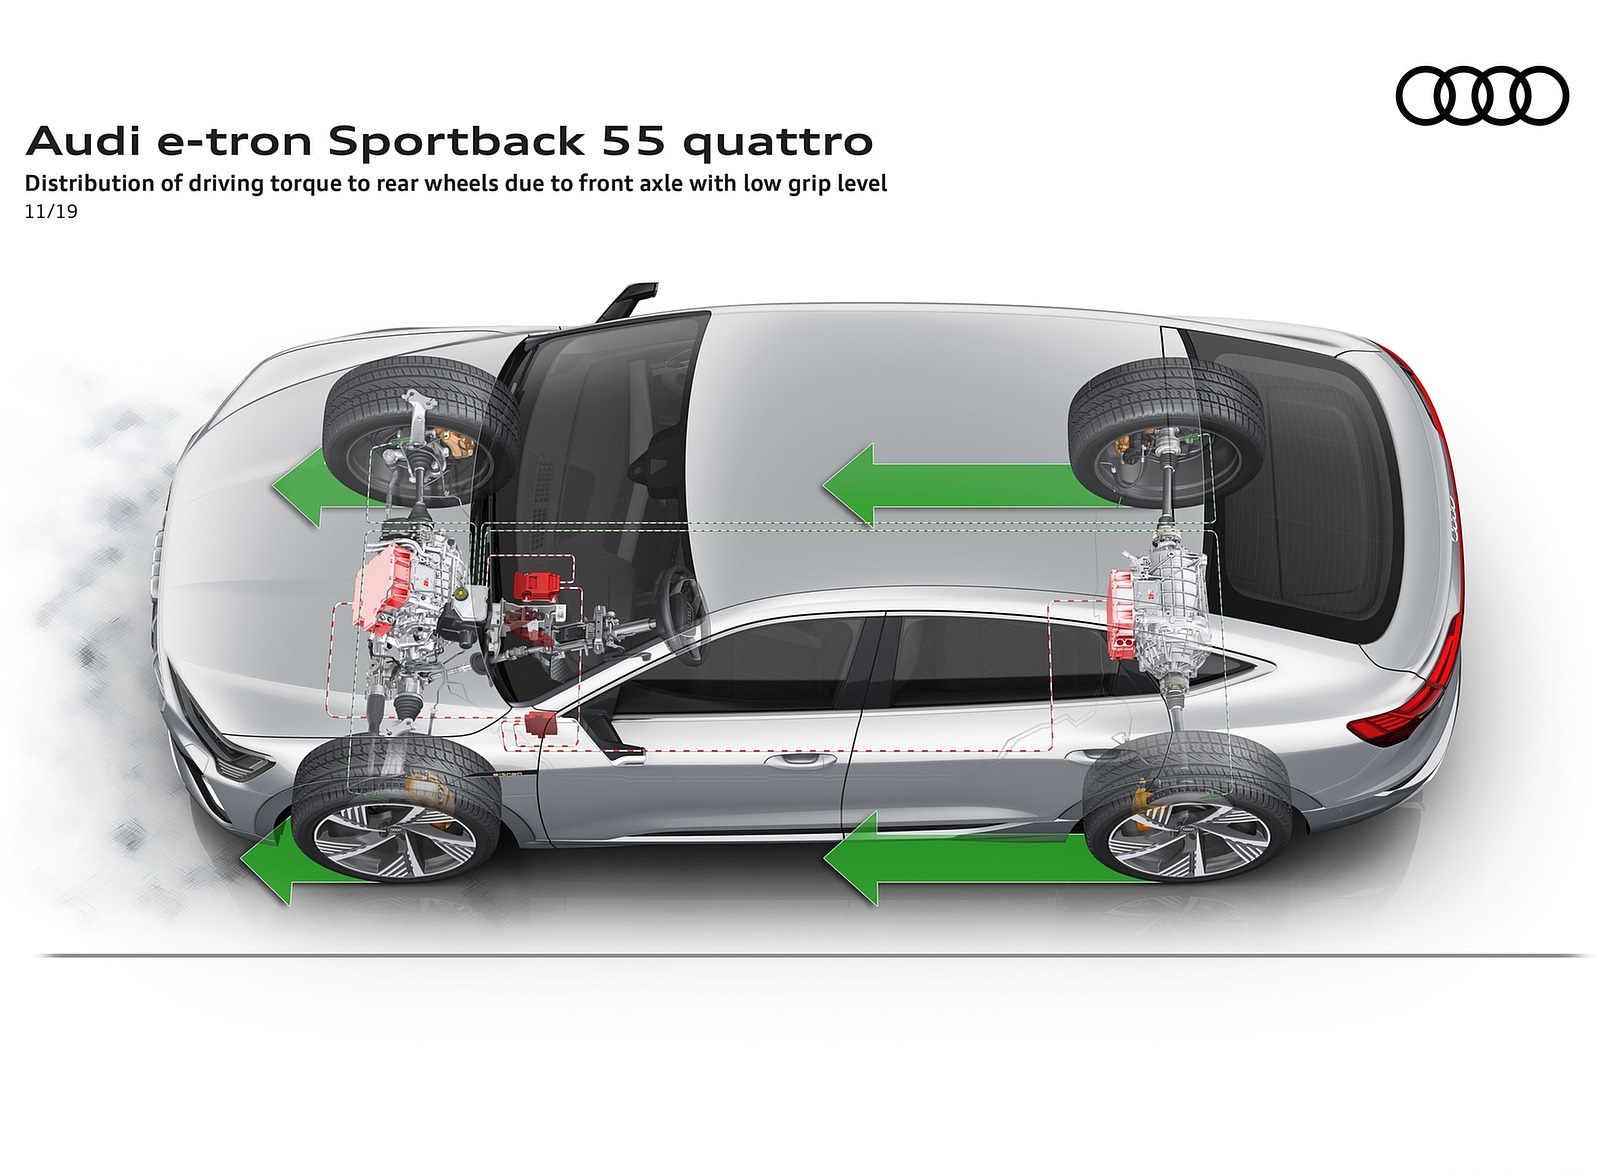 2020 Audi e-tron Sportback Distribution of driving torque to rear wheels due to front axle with low grip level Wallpapers #112 of 145